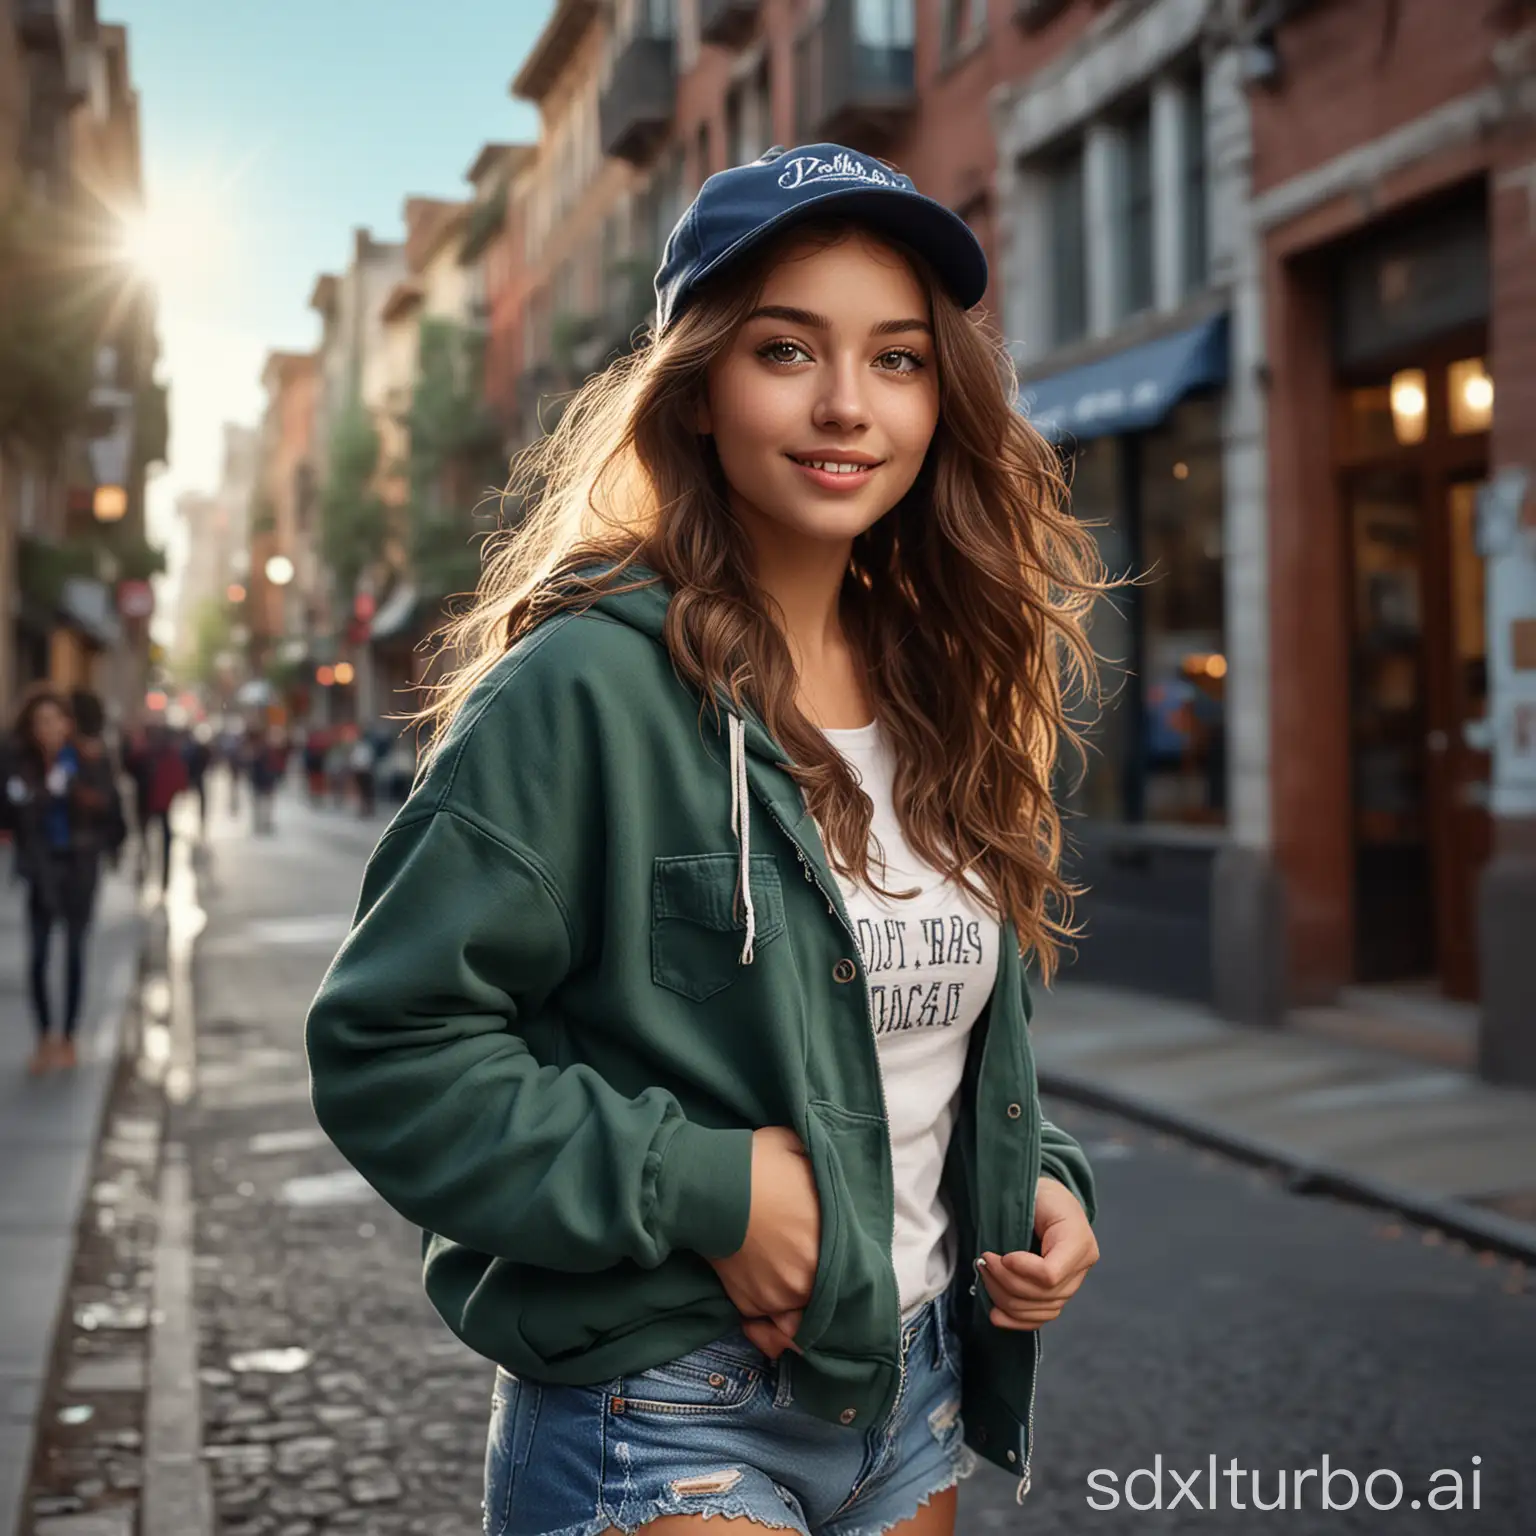 Cheerful-Young-Woman-Strolling-through-City-Streets-in-Dreamy-Setting